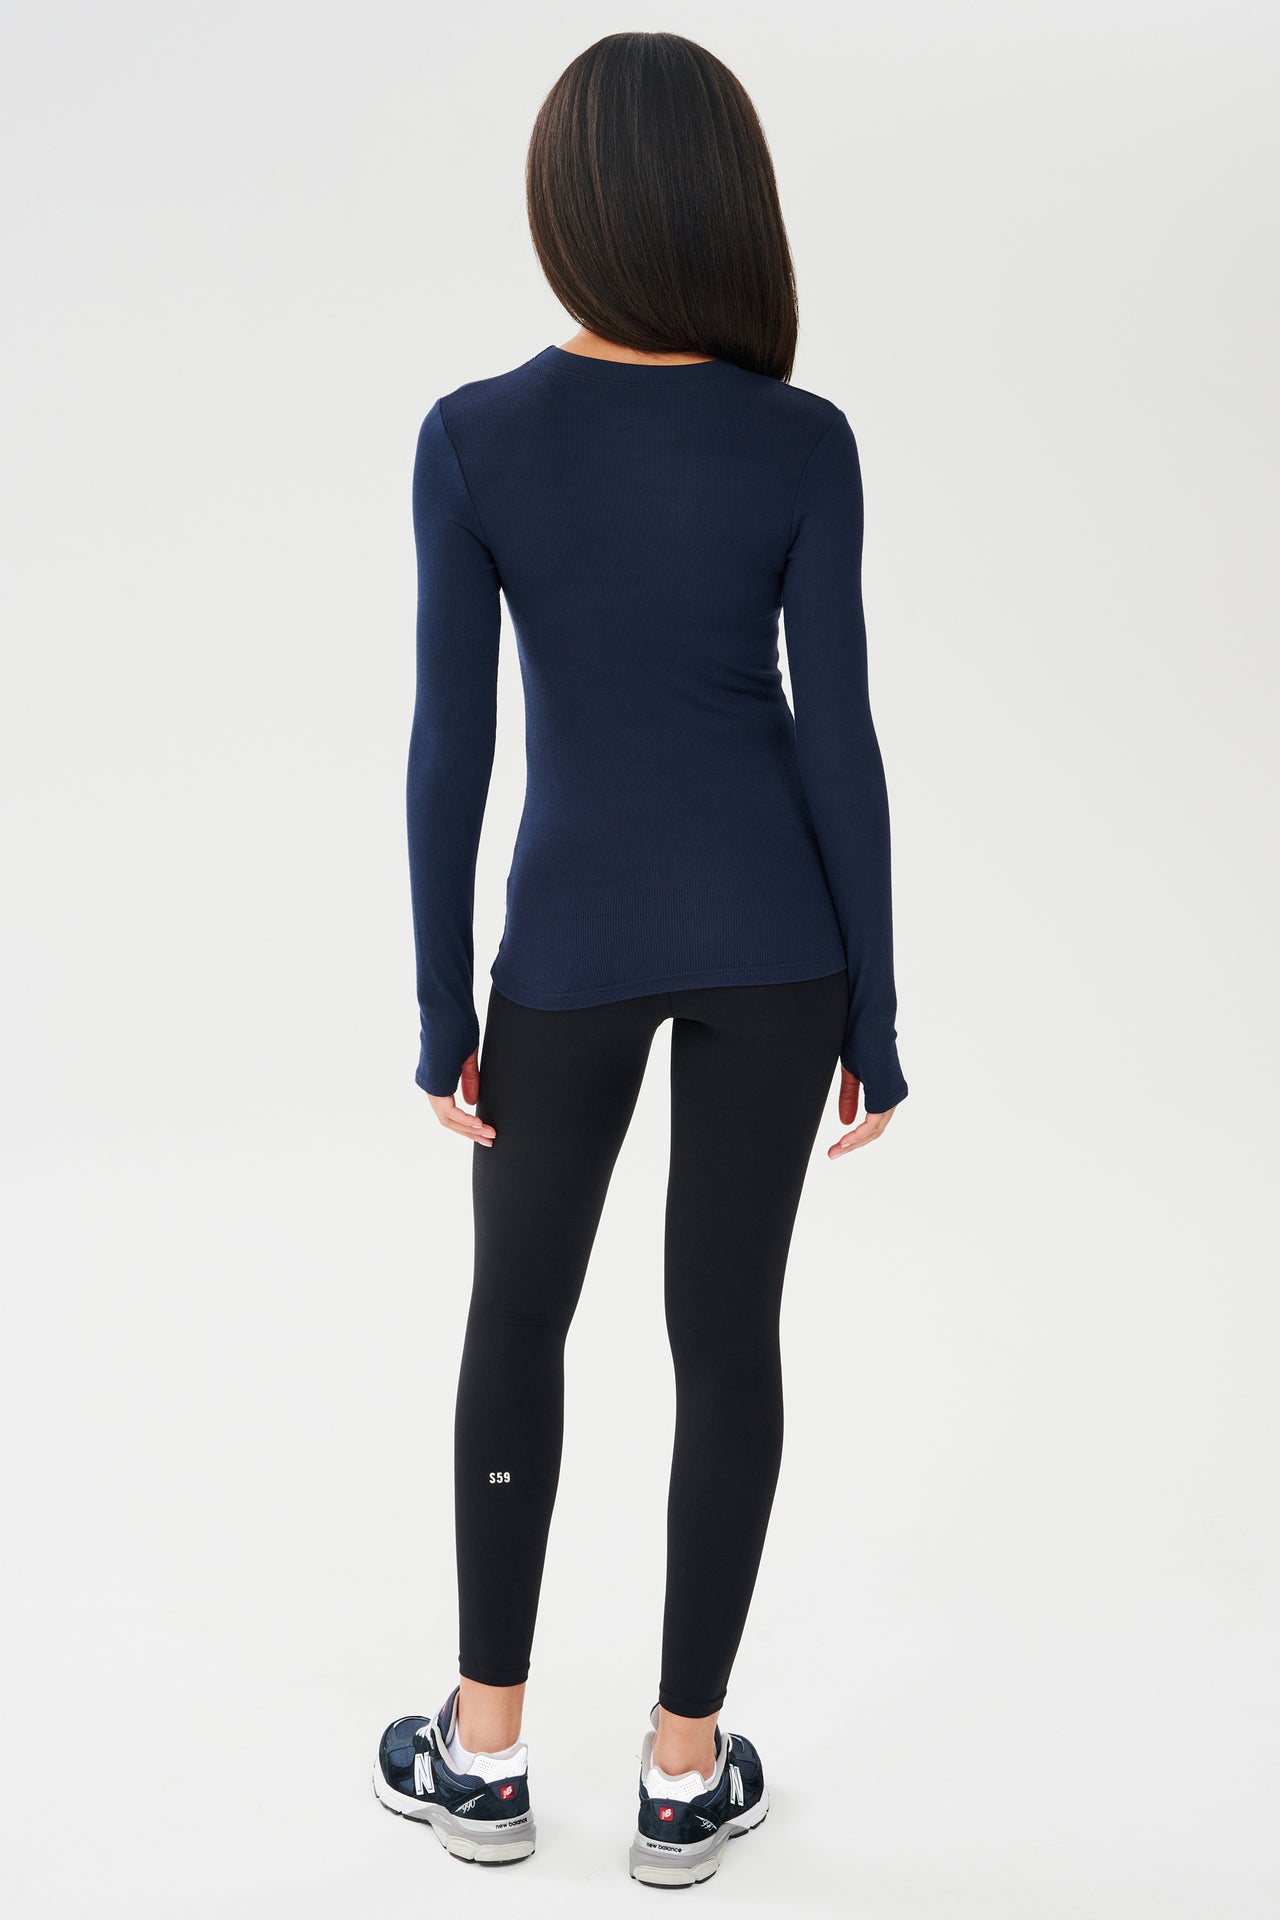 The back view of a woman wearing a SPLITS59 Louise Rib Long Sleeve in Indigo and black leggings, ready for her yoga session.